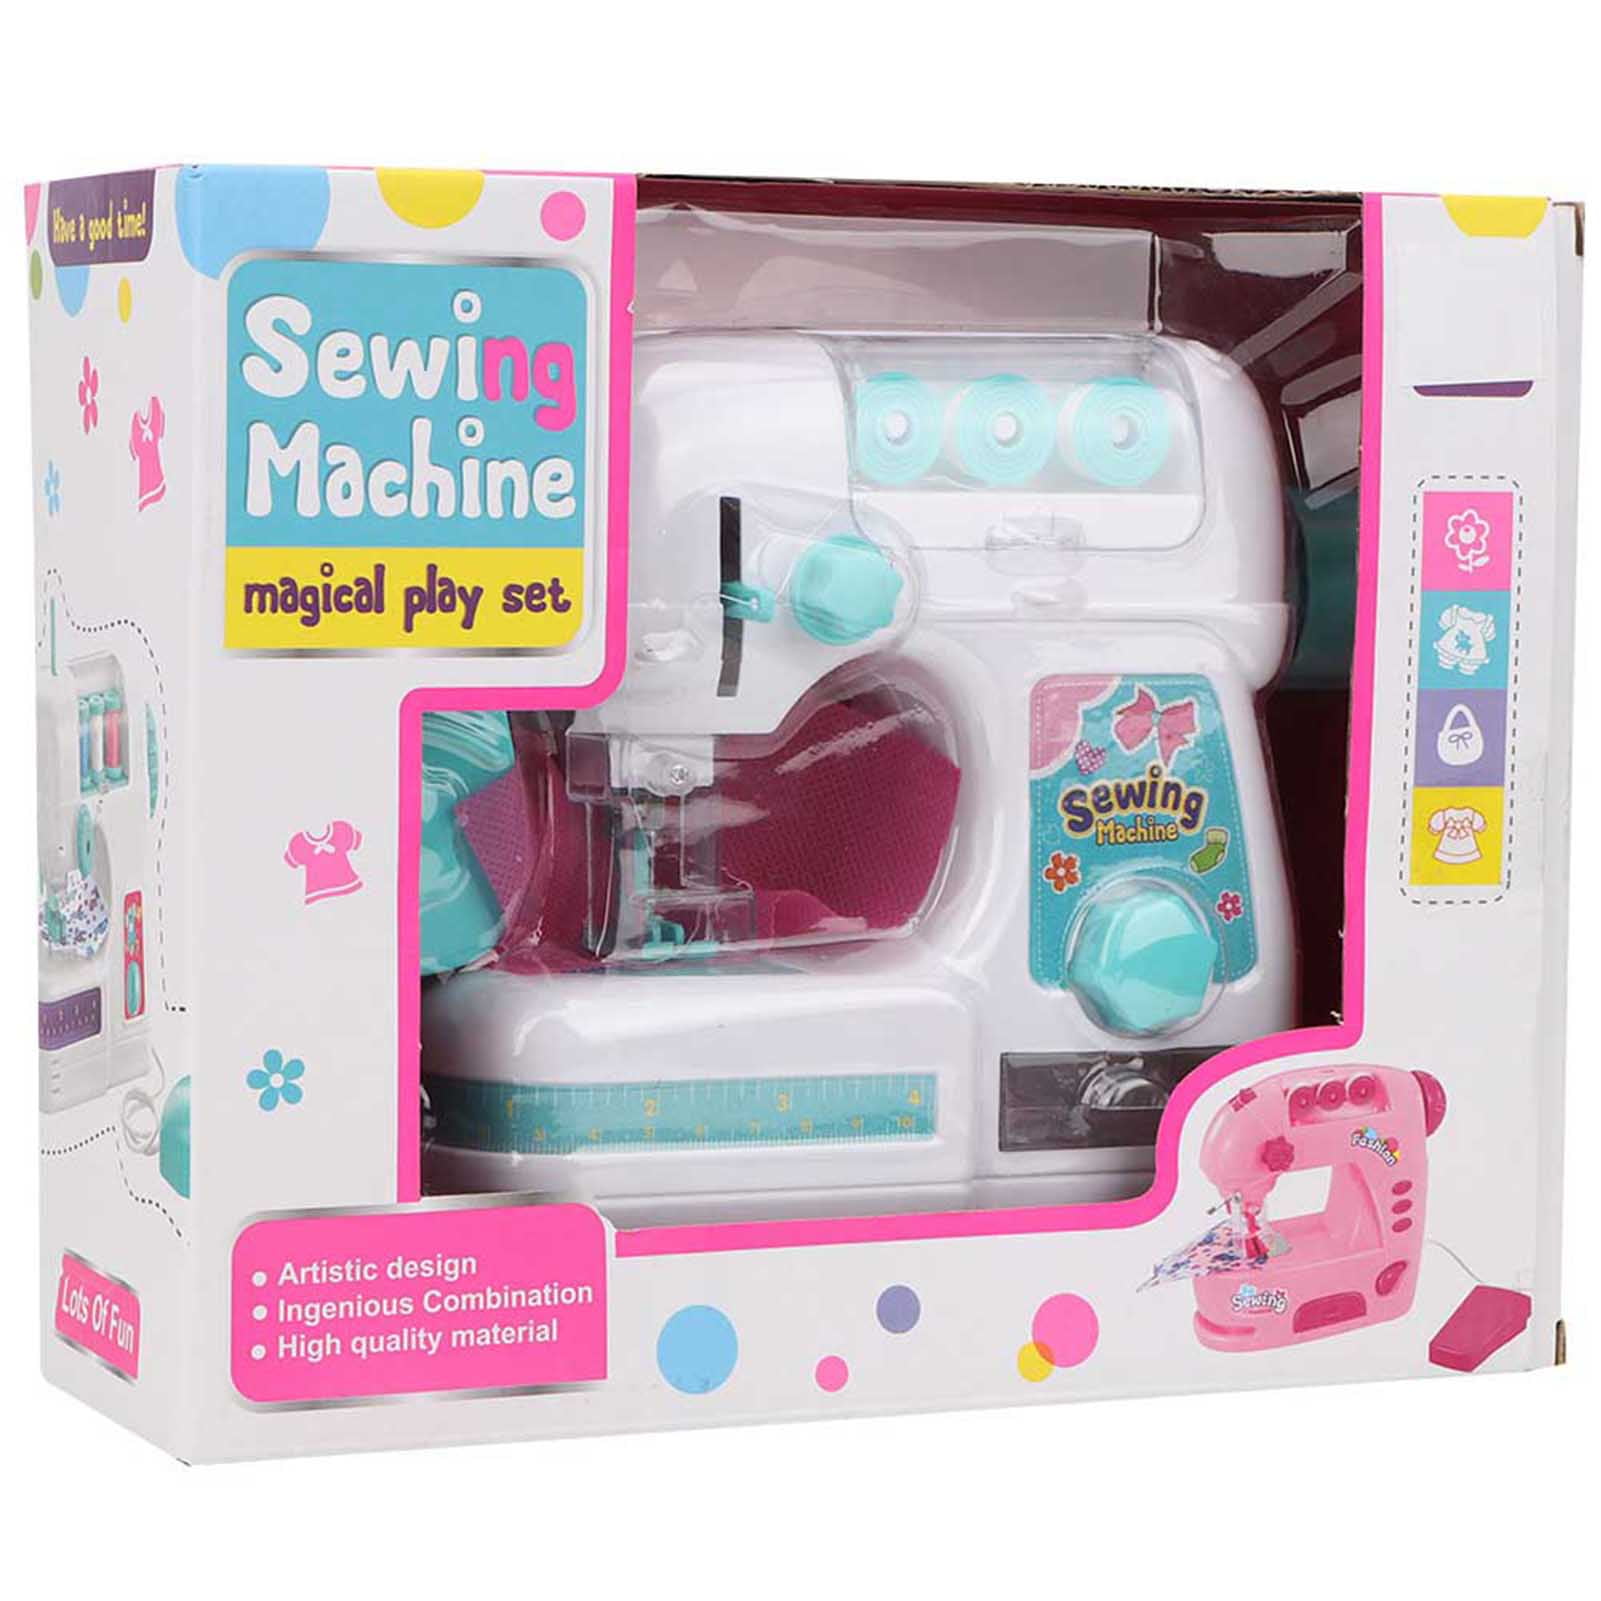 male pattern boldness: Toy Sewing Machines for Children -- Yea or Nay?